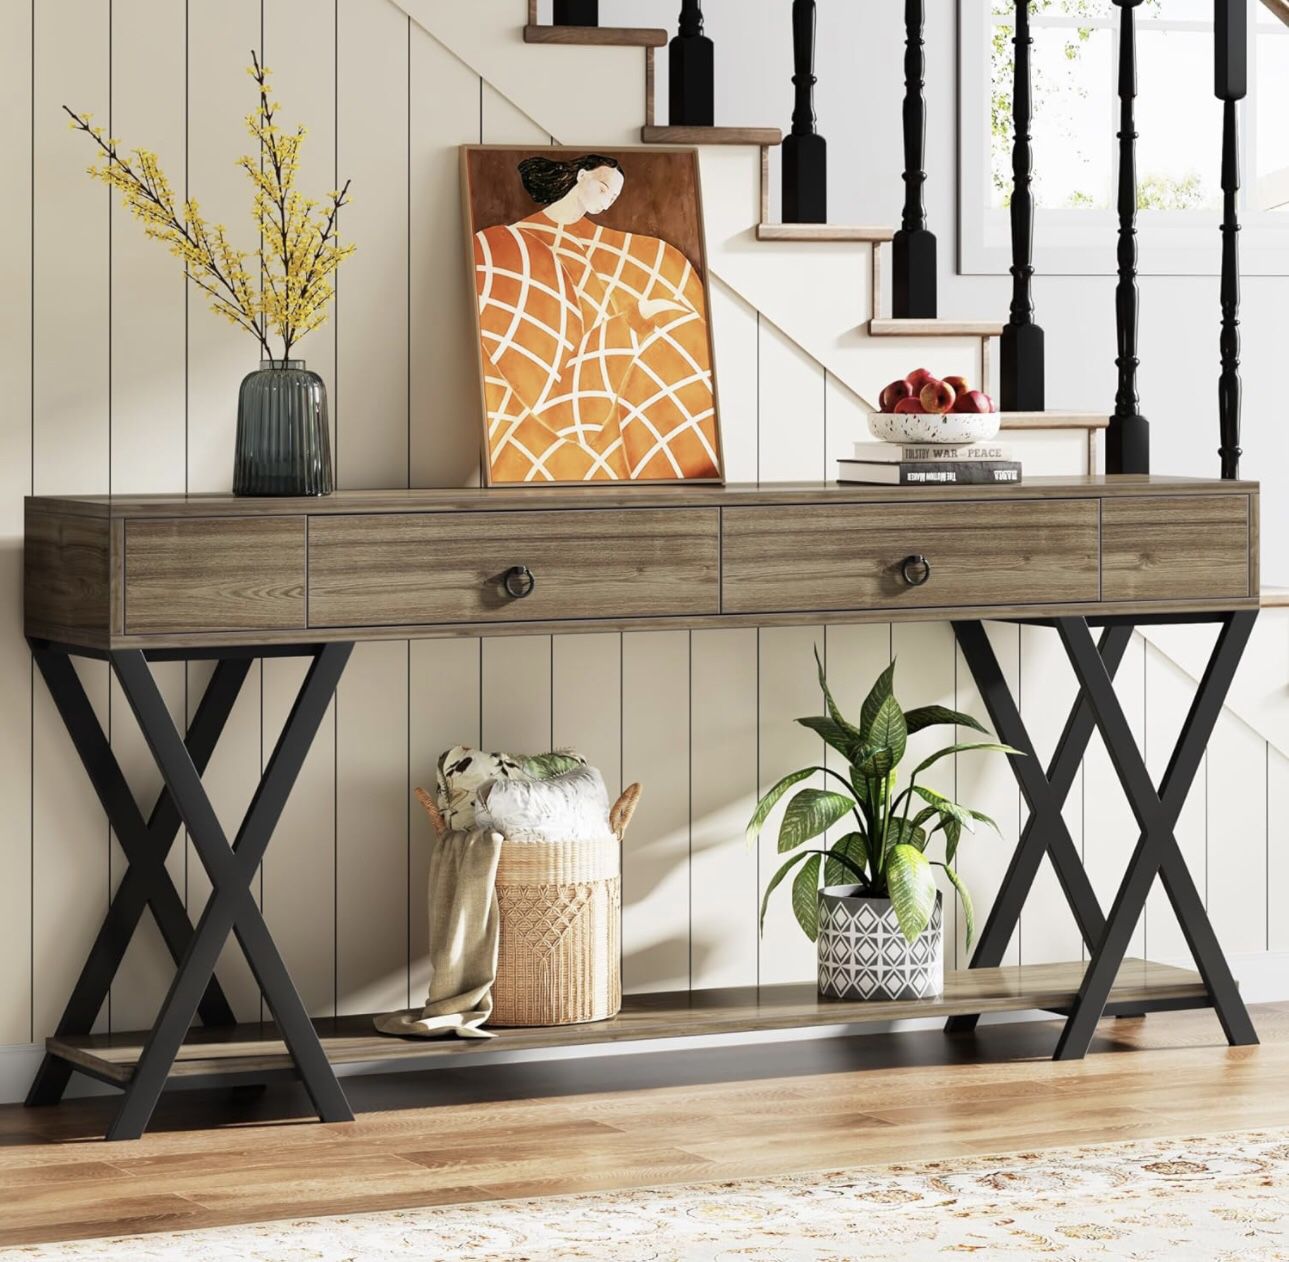 New assembled 71 Console Table with Storage, Large Sofa Table with Drawers, Farmhouse Entryway Table with Shelves, Industrial Hallway Table, Long fory